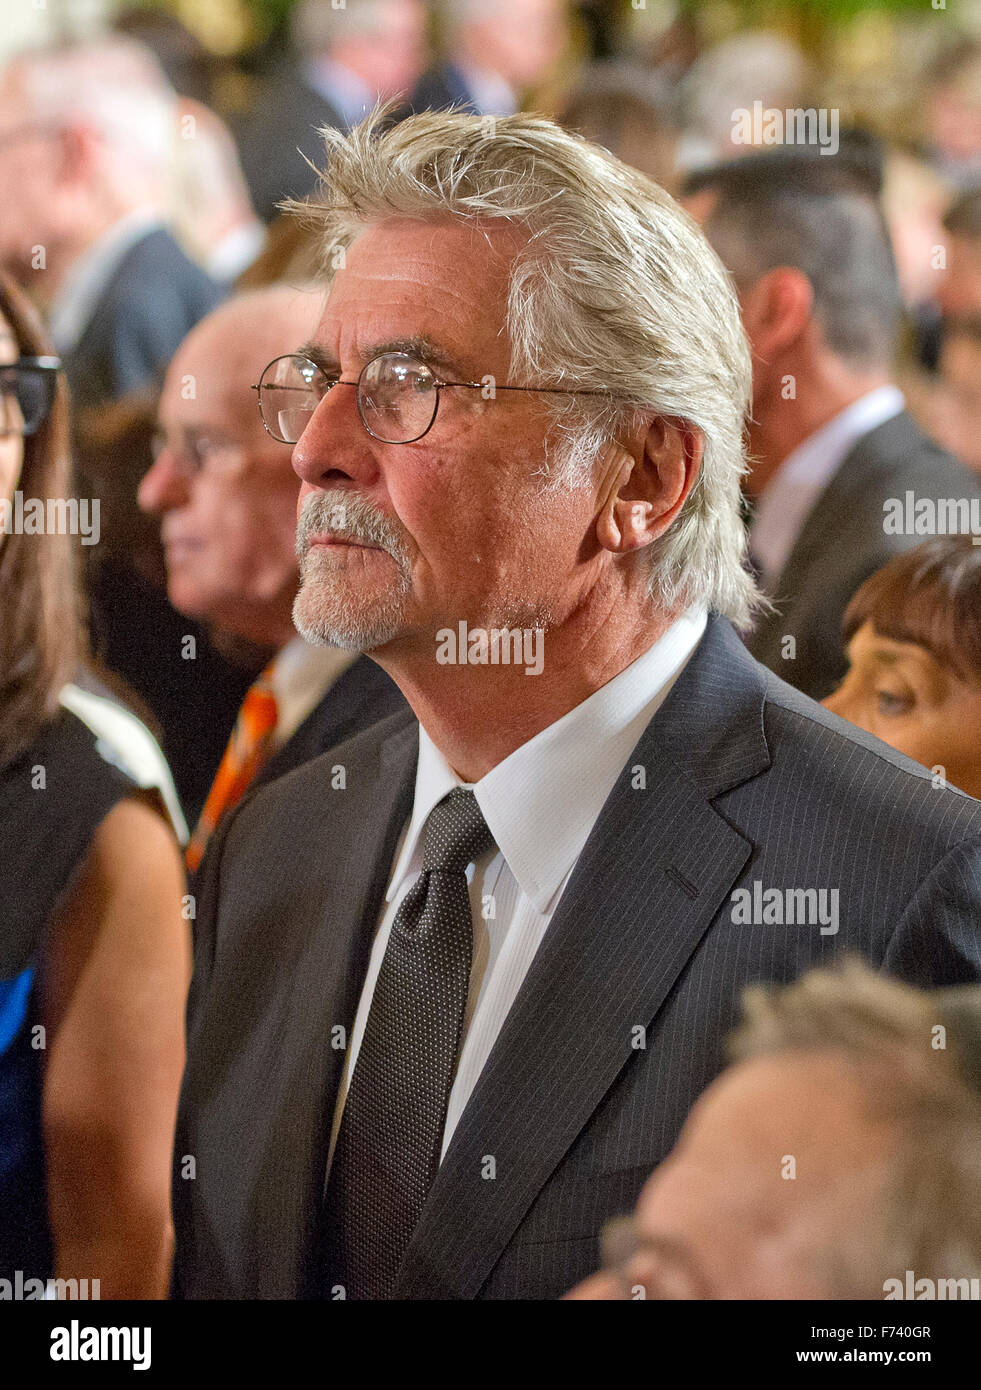 Presidential Medal of Freedom recipient Barbra Streisand's husband, James Brolin prepares to depart following a ceremony in the East Room of the White House in Washington, DC on Tuesday, November 24, 2015. The Medal is the highest US civilian honor, presented to individuals who have made especially meritorious contributions to the security or national interests of the US, to world peace, or to cultural or significant public or private endeavors. Photo: Ron Sachs/CNP/dpa - NO WIRE SERVICE - Stock Photo